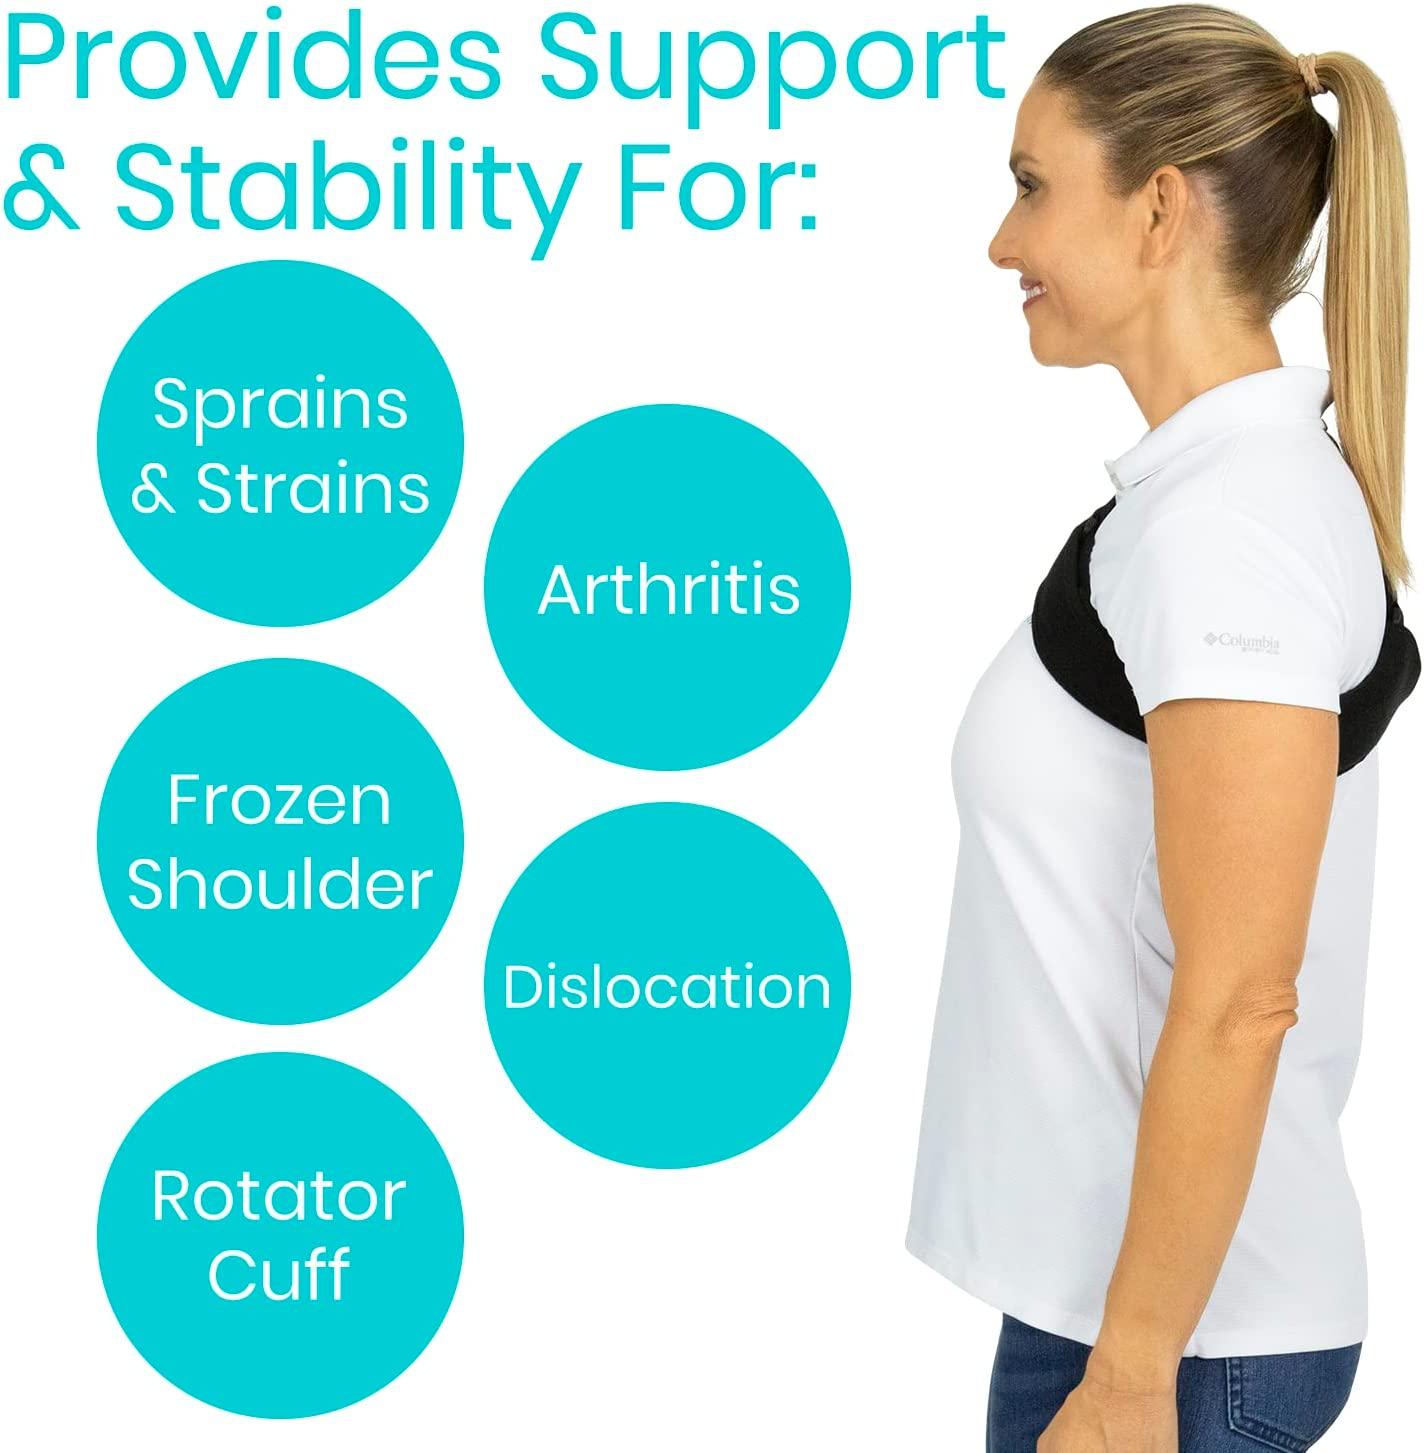 Vive Shoulder Stability Brace - Injury Recovery Compression Support Sleeve  - for Rotator Cuff Injuries, Arthritis, Sprain, Dislocation, PT - Targeted